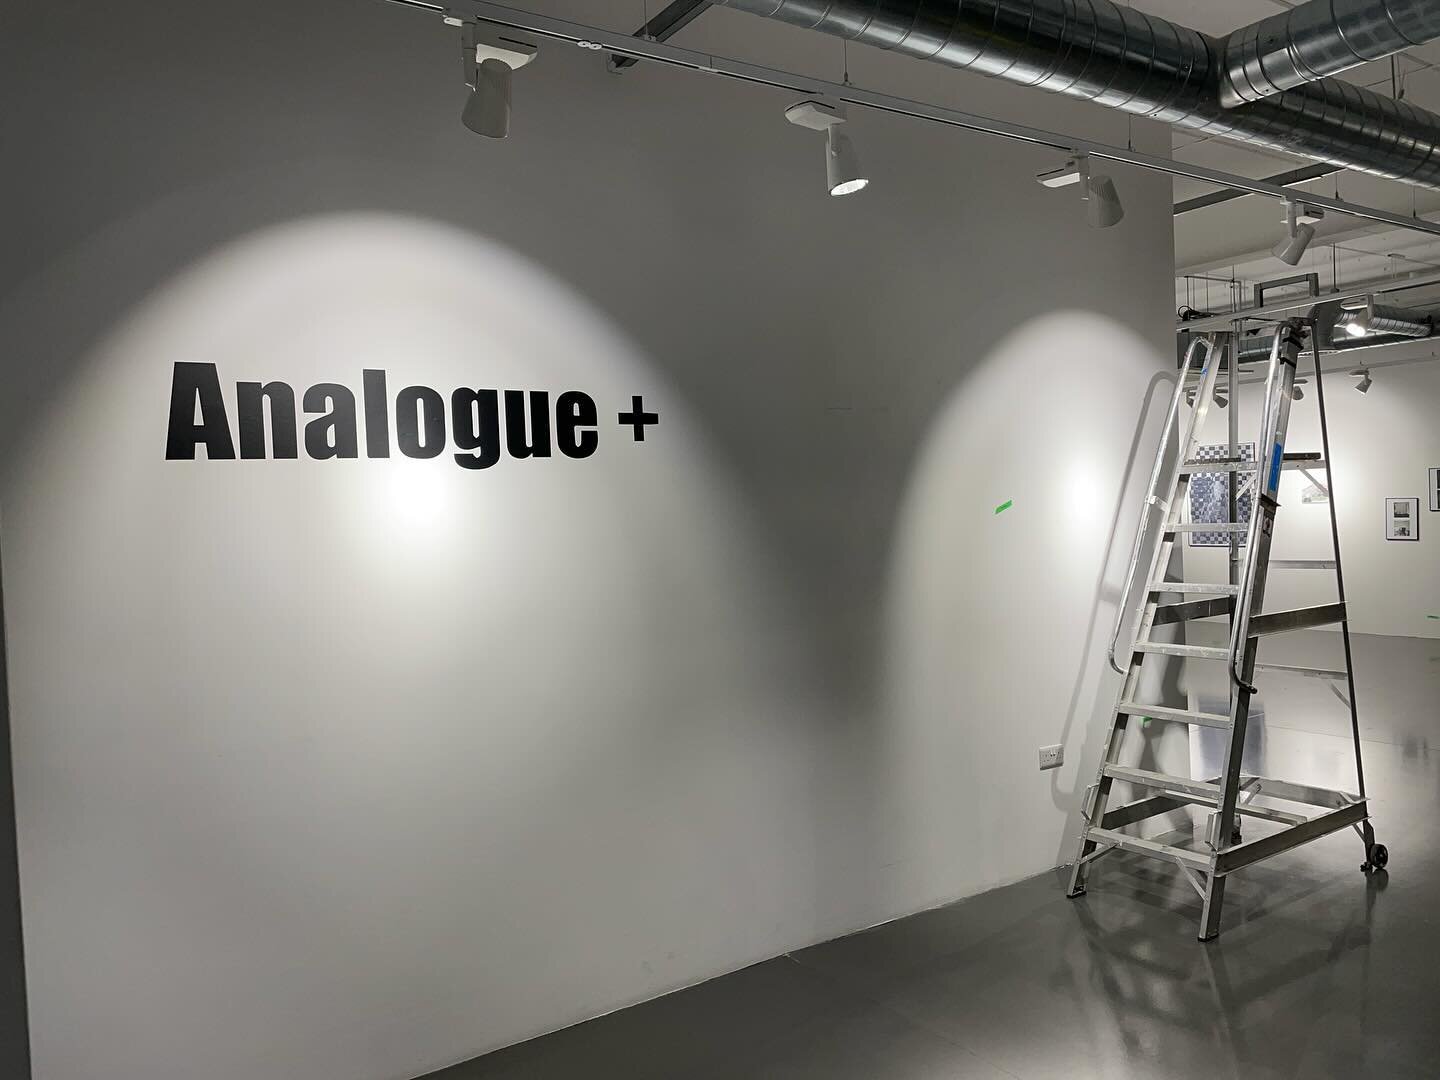 #exhibition #installation #analogue plus @way.out.east @ba_photography_uel students opening tomorrow!

#keepfilmalive #analogphotography #photography #fineartphotography #35mm #projection